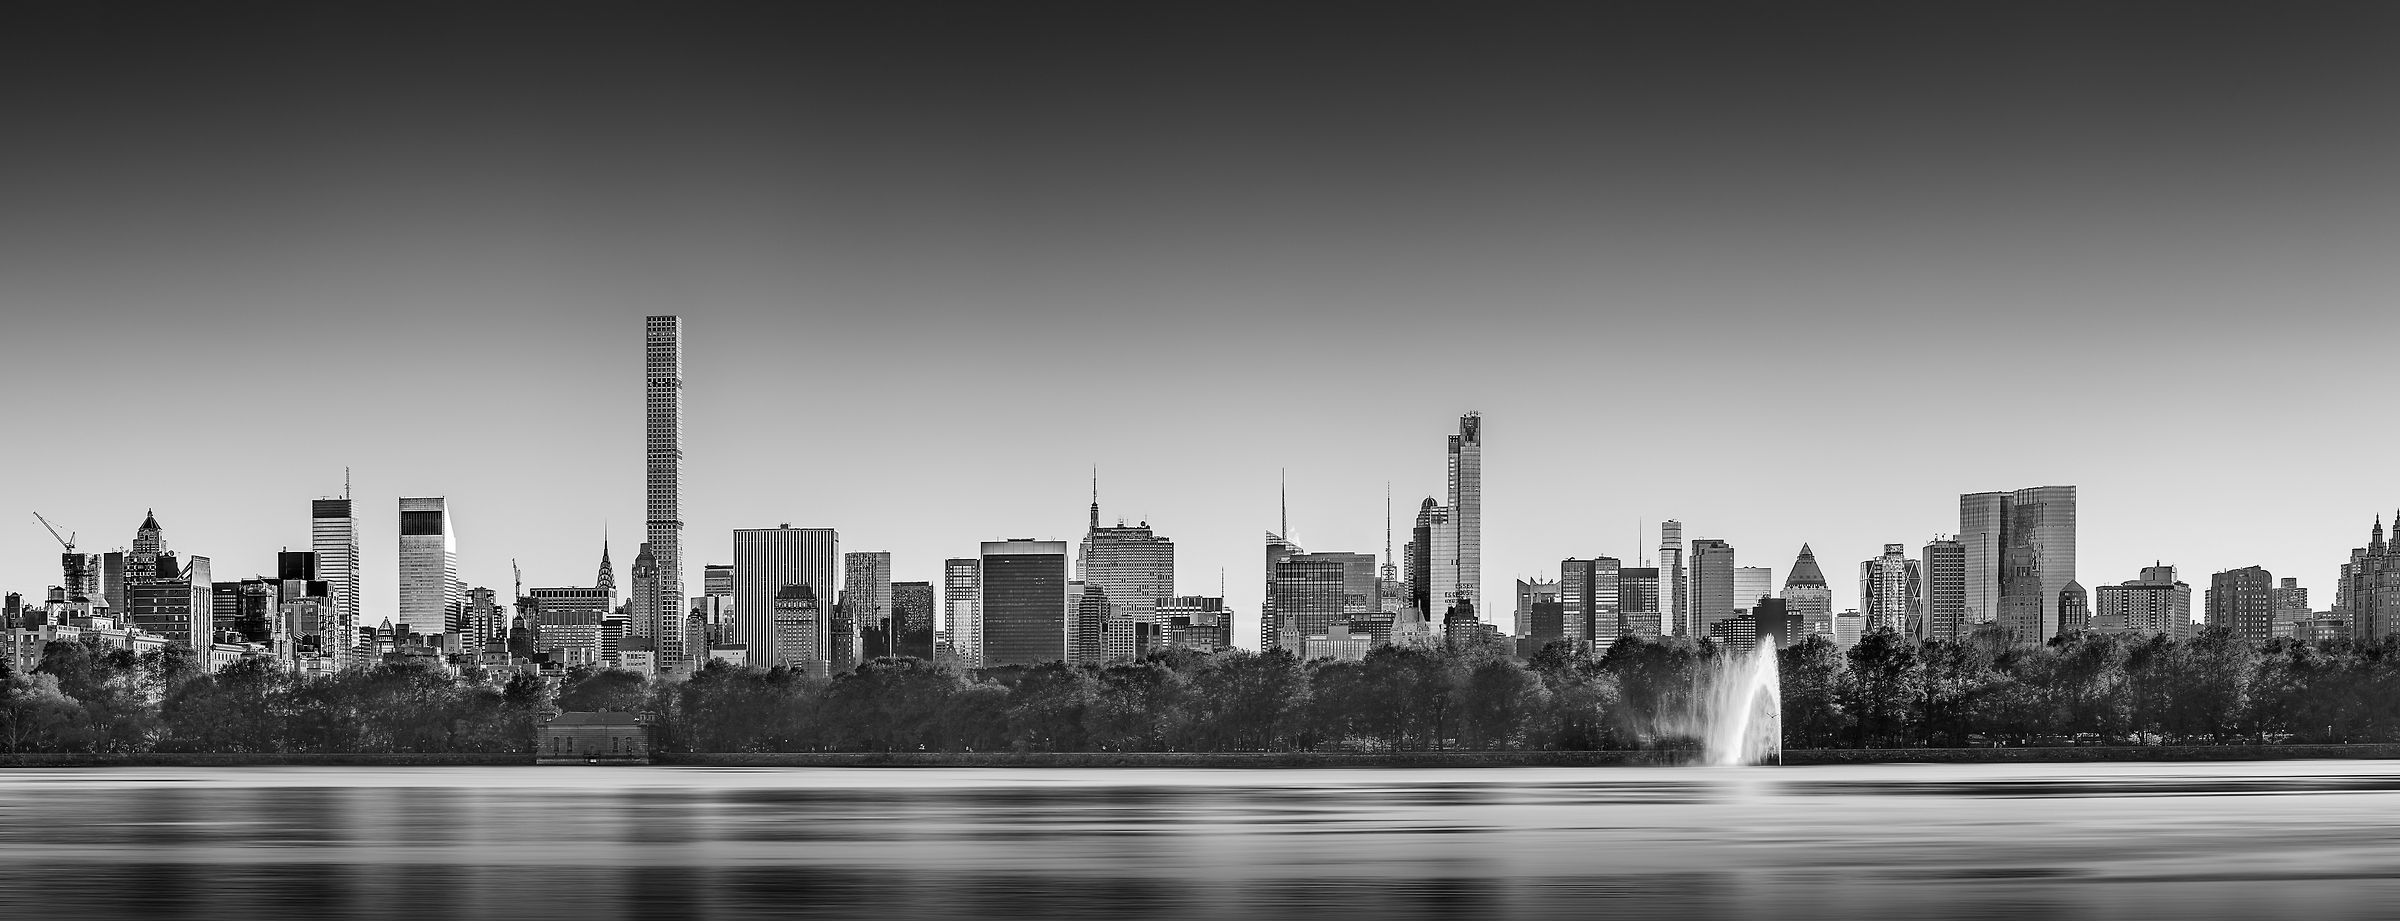 215 megapixels! A very high definition cityscape VAST photo of the Midtown Manhattan city skyline in New York City from the reservoir in Central Park; created by Dan Piech.